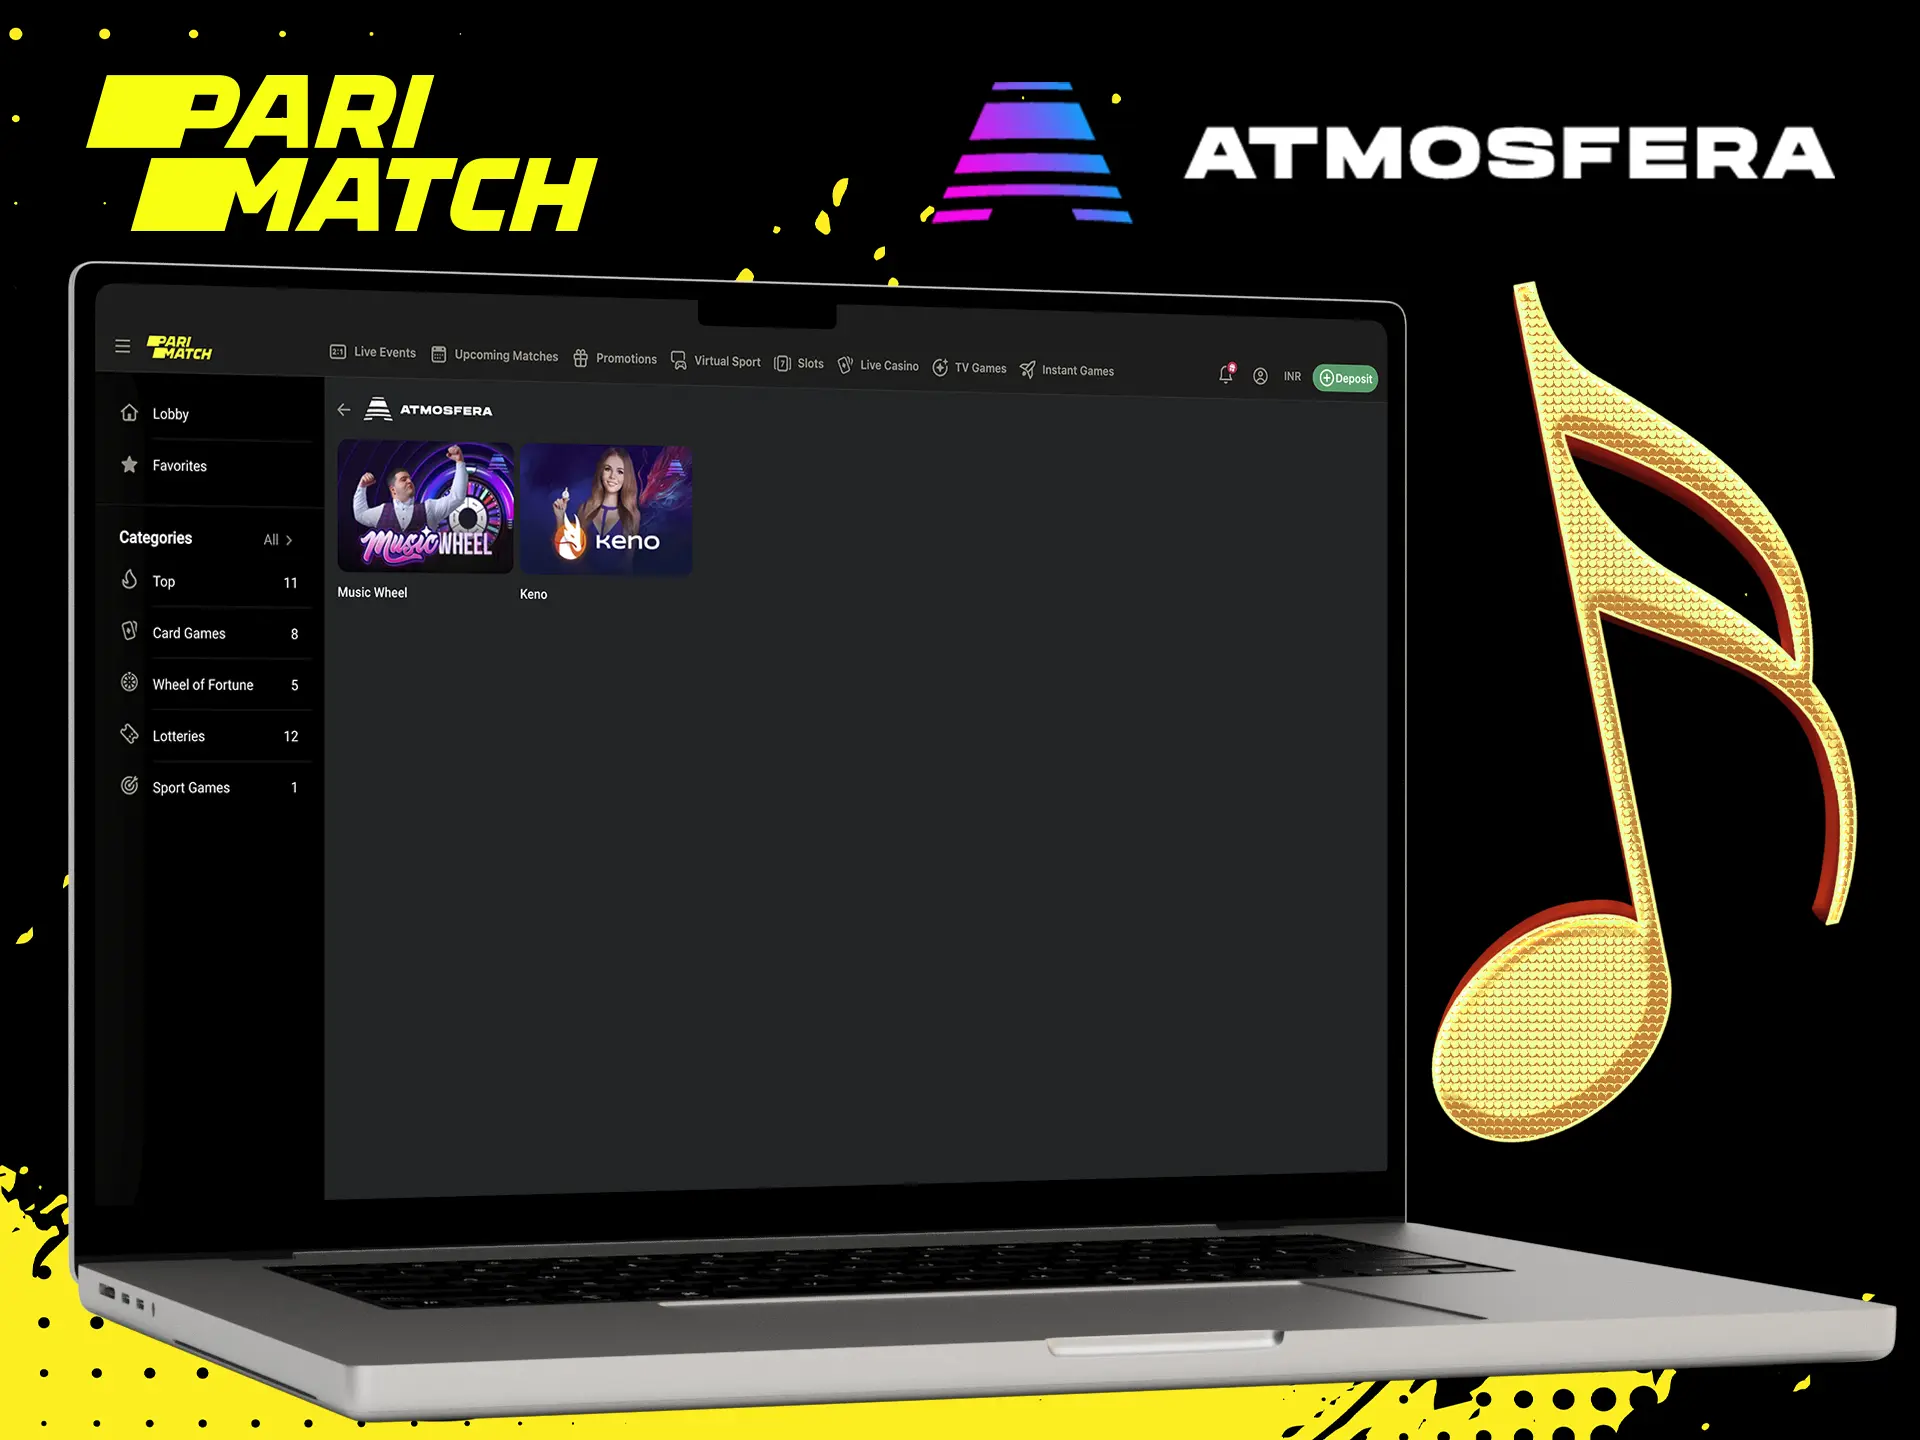 Guess the tune and get rewarded for it in Parimatch's Atmosfera provider games.